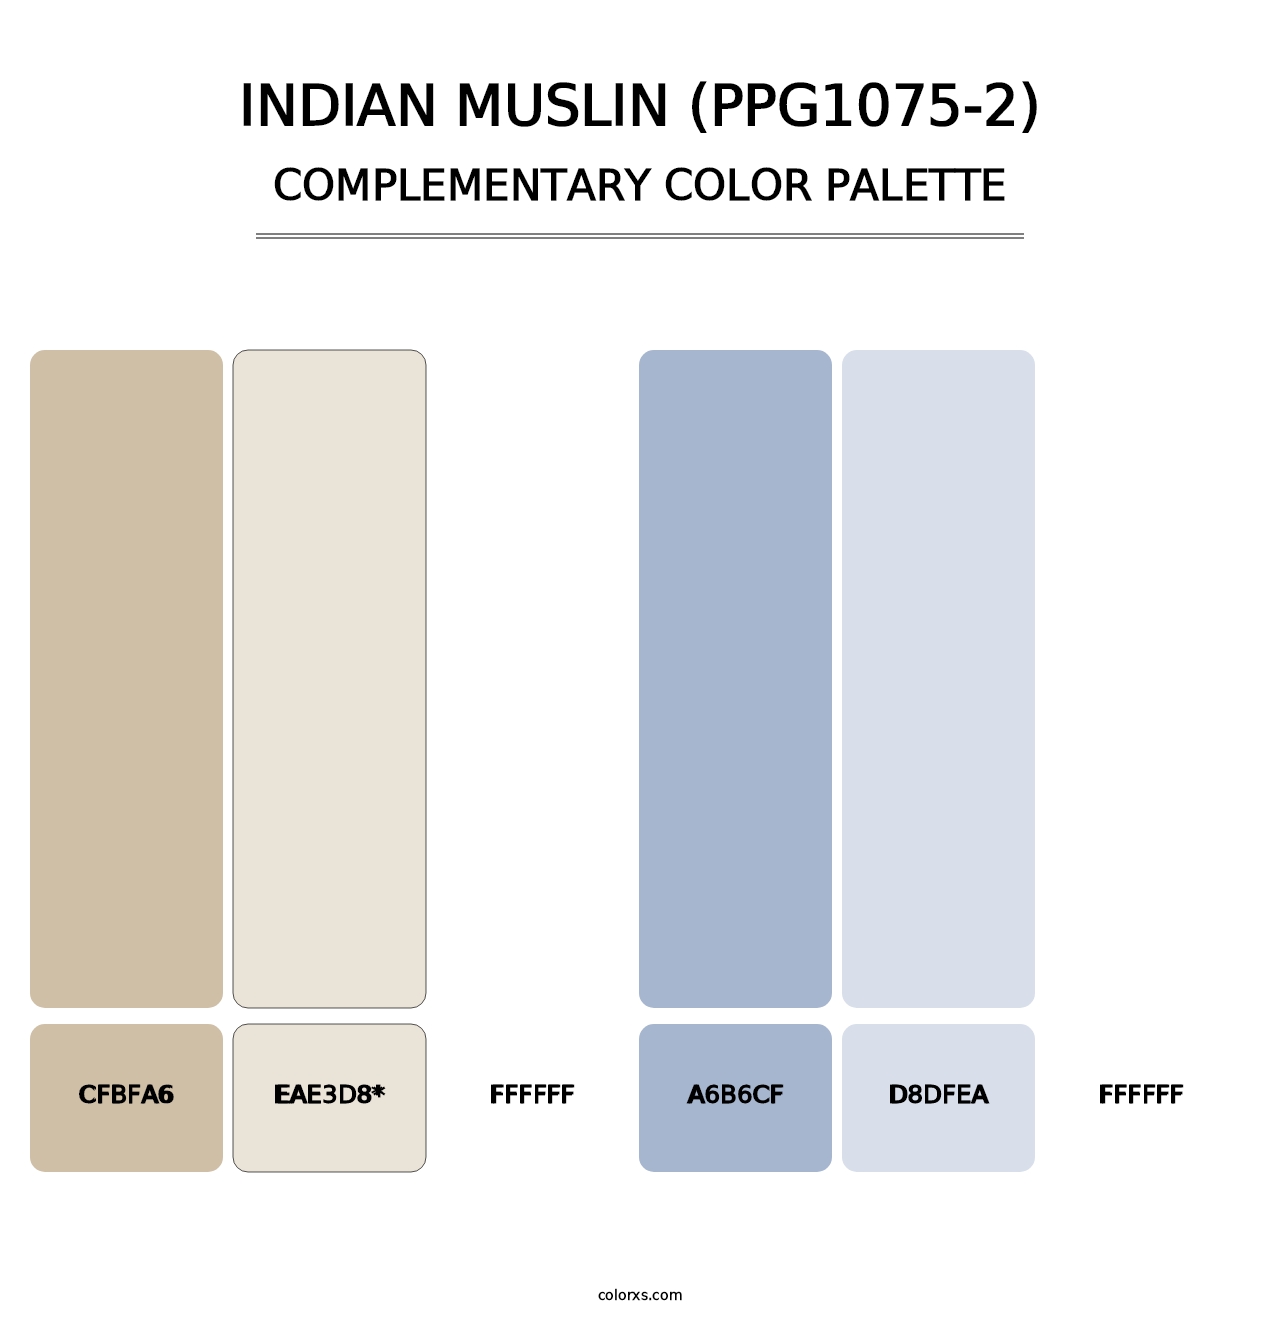 Indian Muslin (PPG1075-2) - Complementary Color Palette